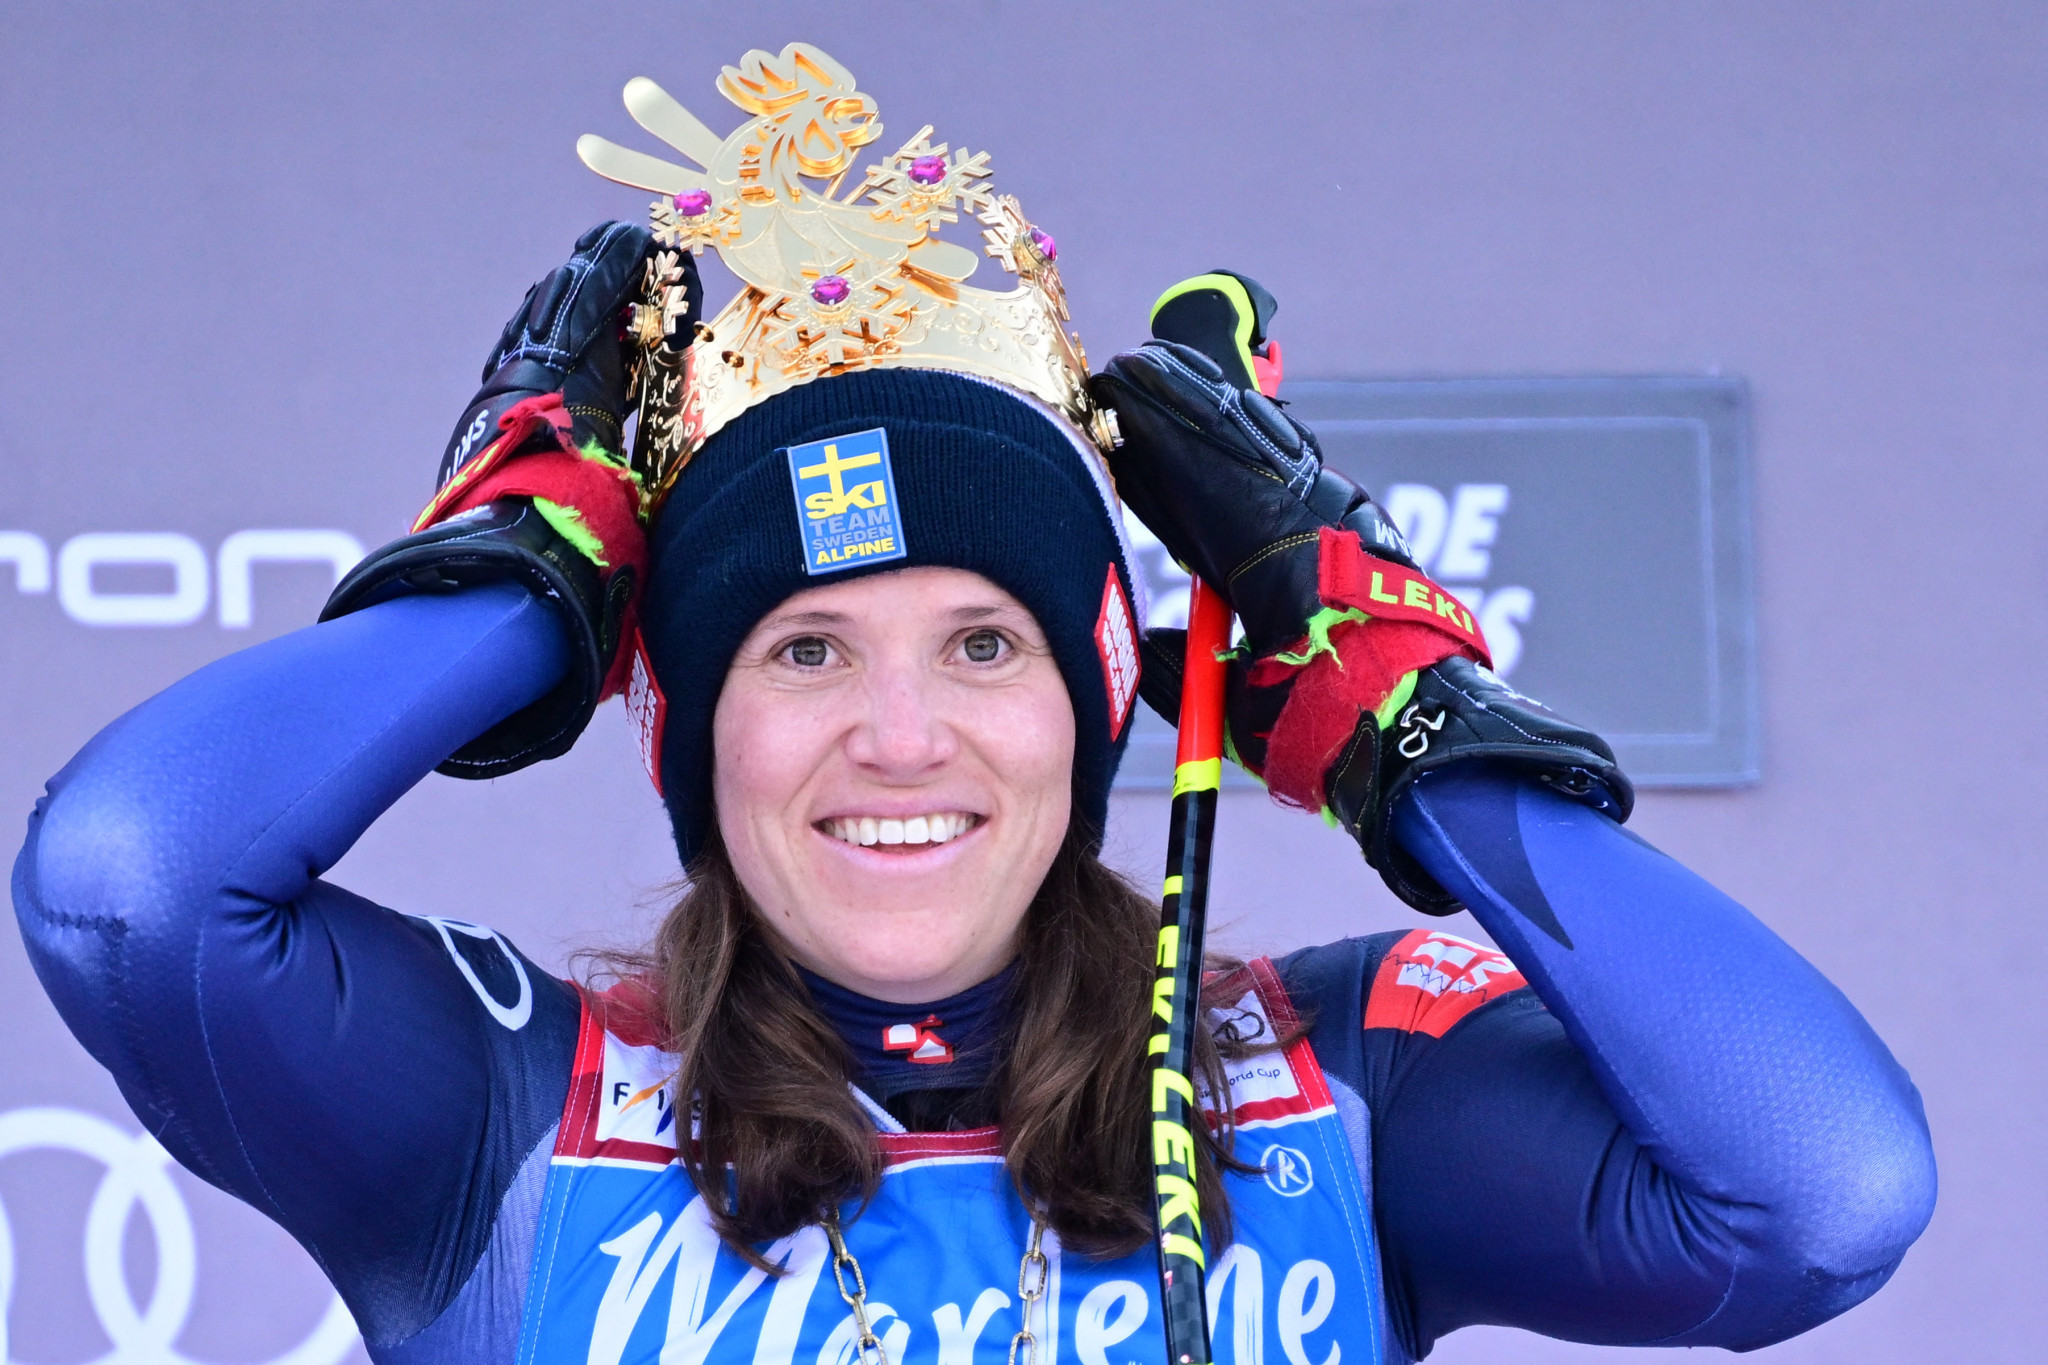 Sweden's Sara Hector is emerging as the top women's giant slalom skier at just the right time ©Getty Images